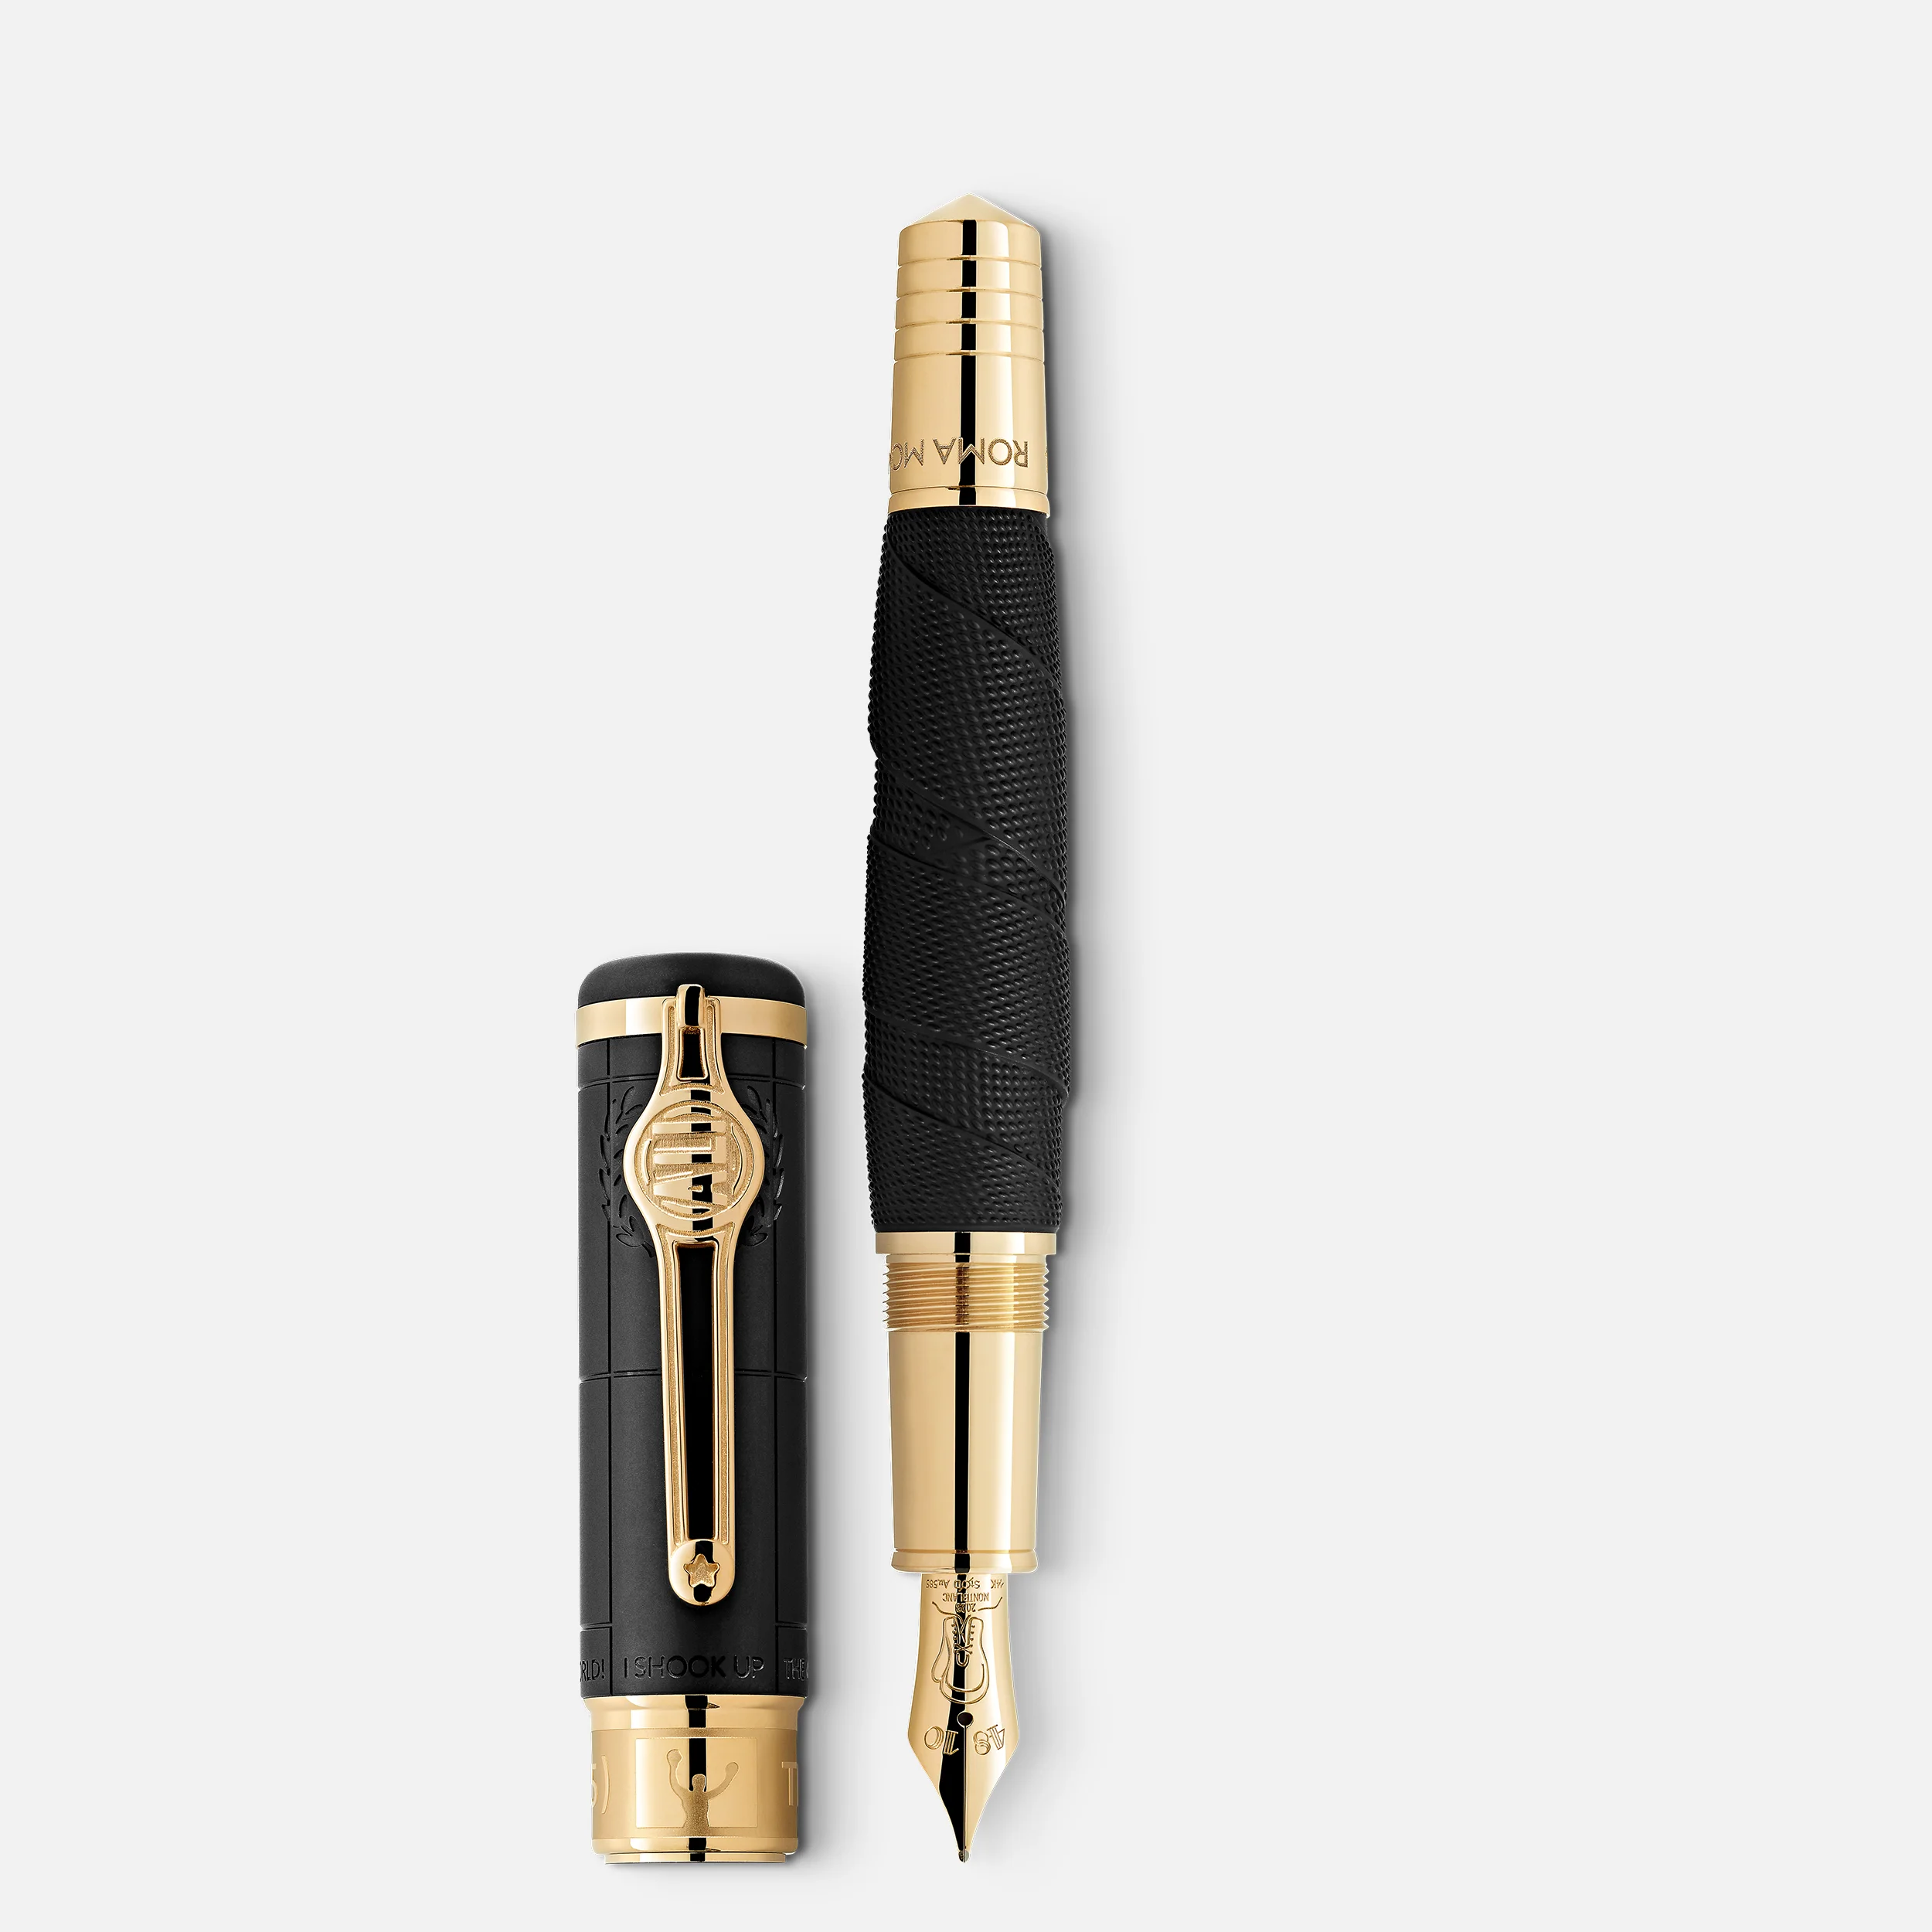 Montblanc Great Characters Muhammad Ali Special Edition Fountain Pen - Pencraft the boutique